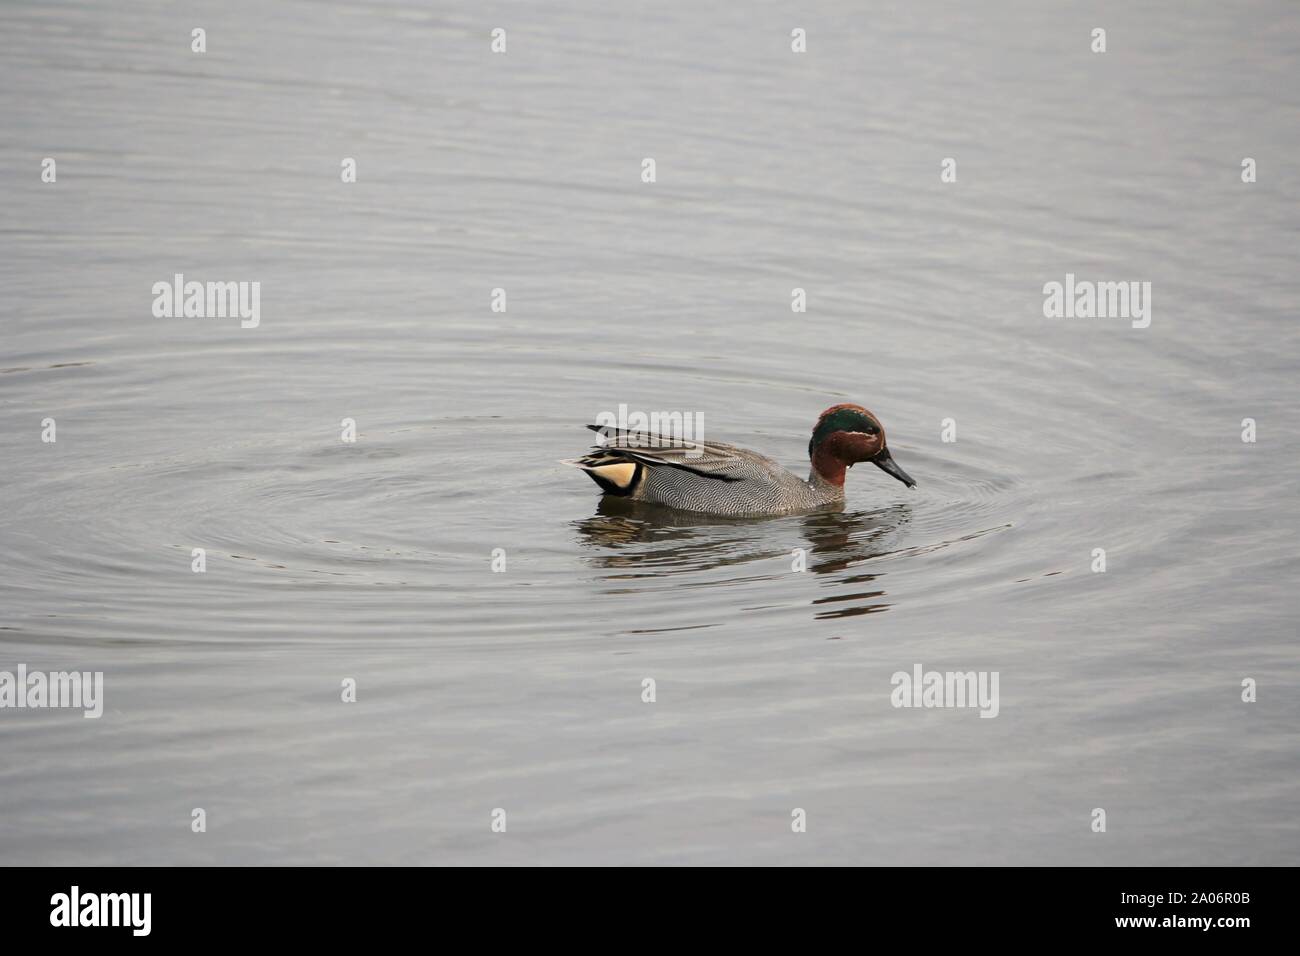 A Male of Common Teal (Anas crecca) on a lake at Münster, Germany Stock Photo